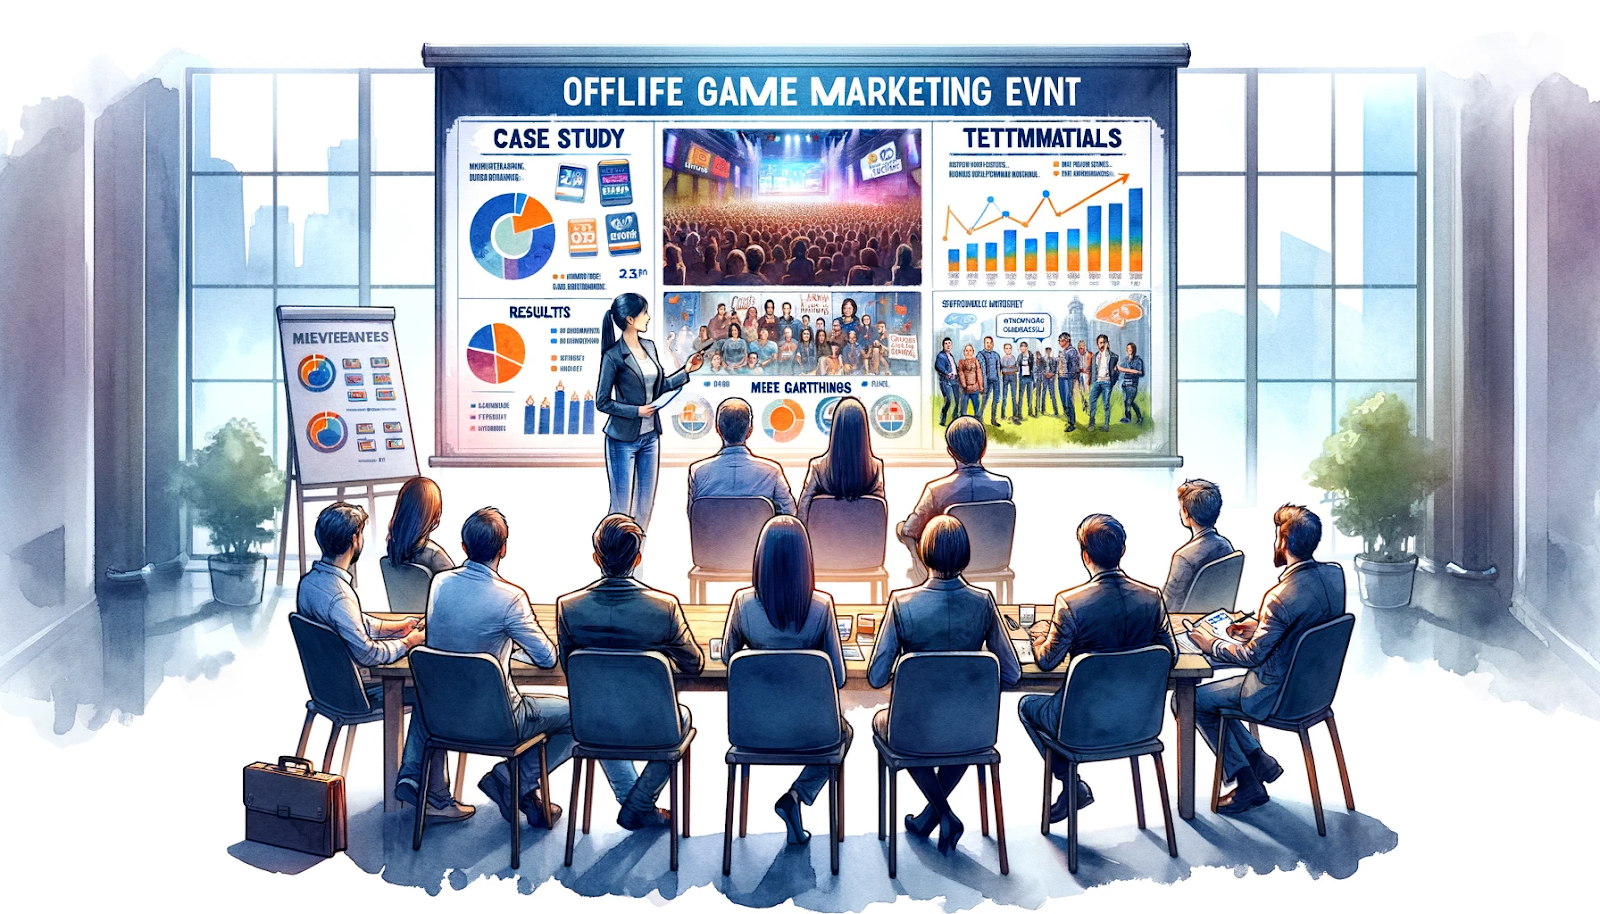 a team meeting where marketing professionals present a case study of a successful offline game marketing event. 